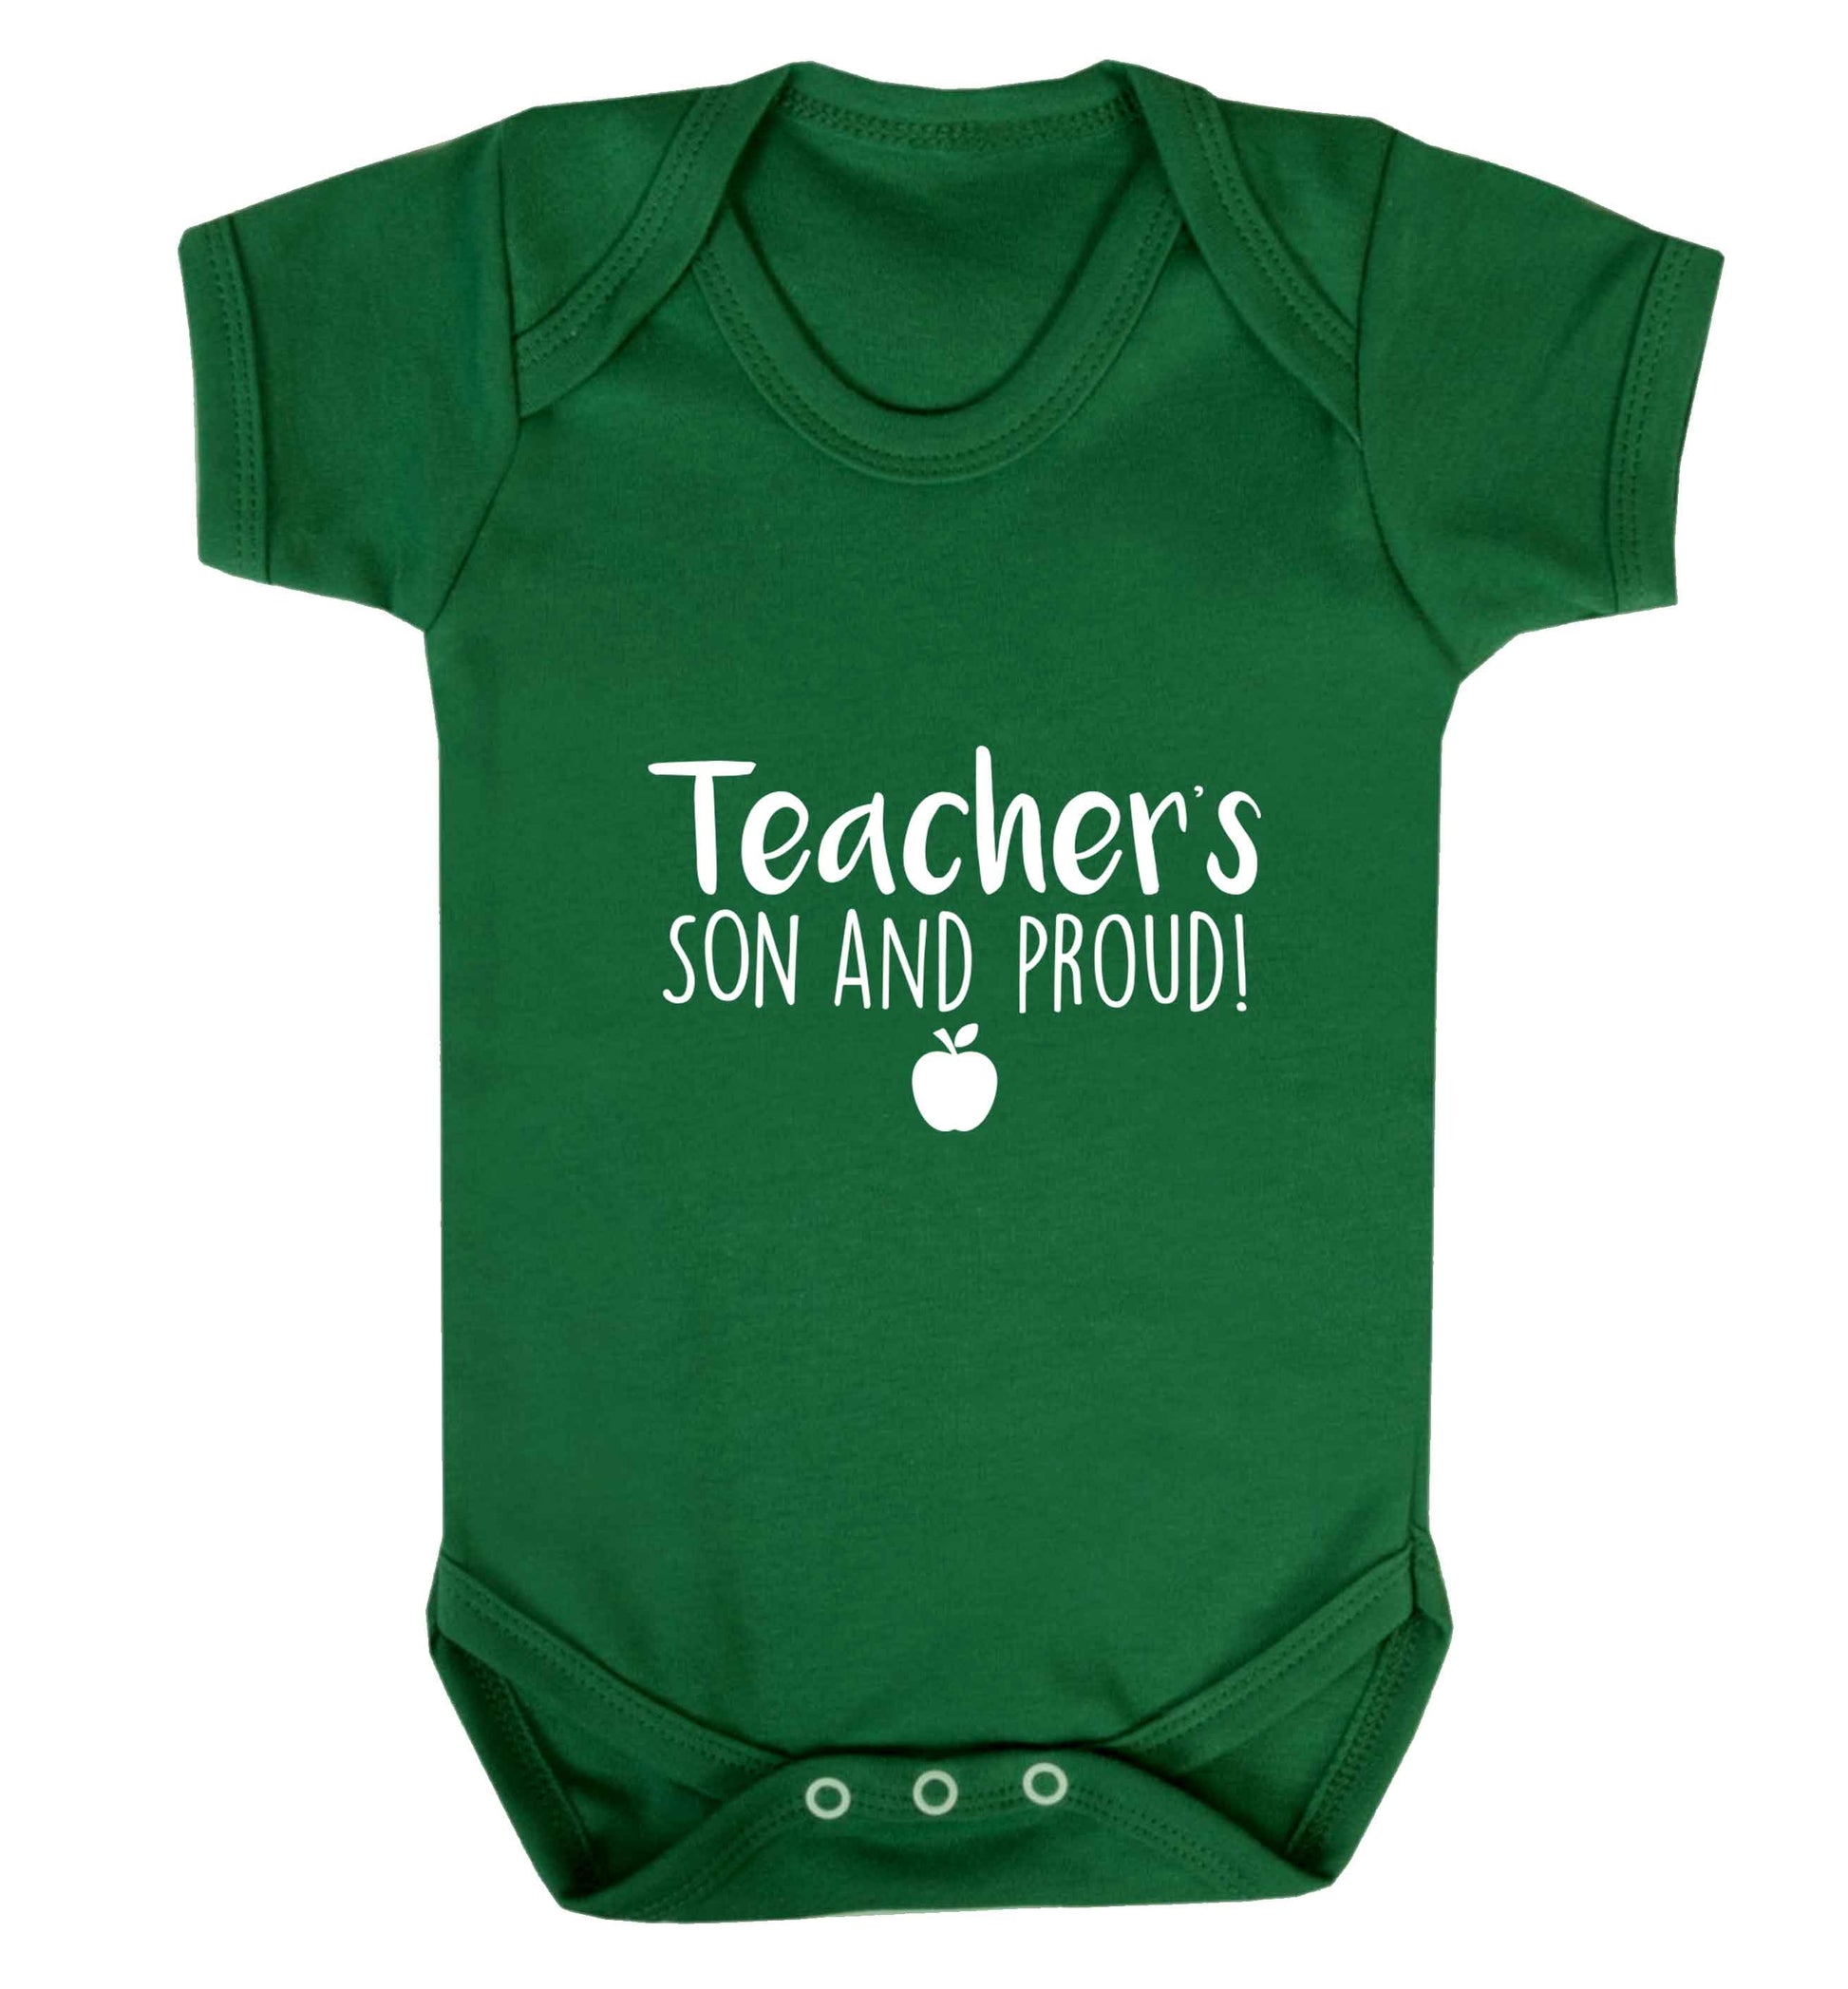 Teachers son and proud baby vest green 18-24 months